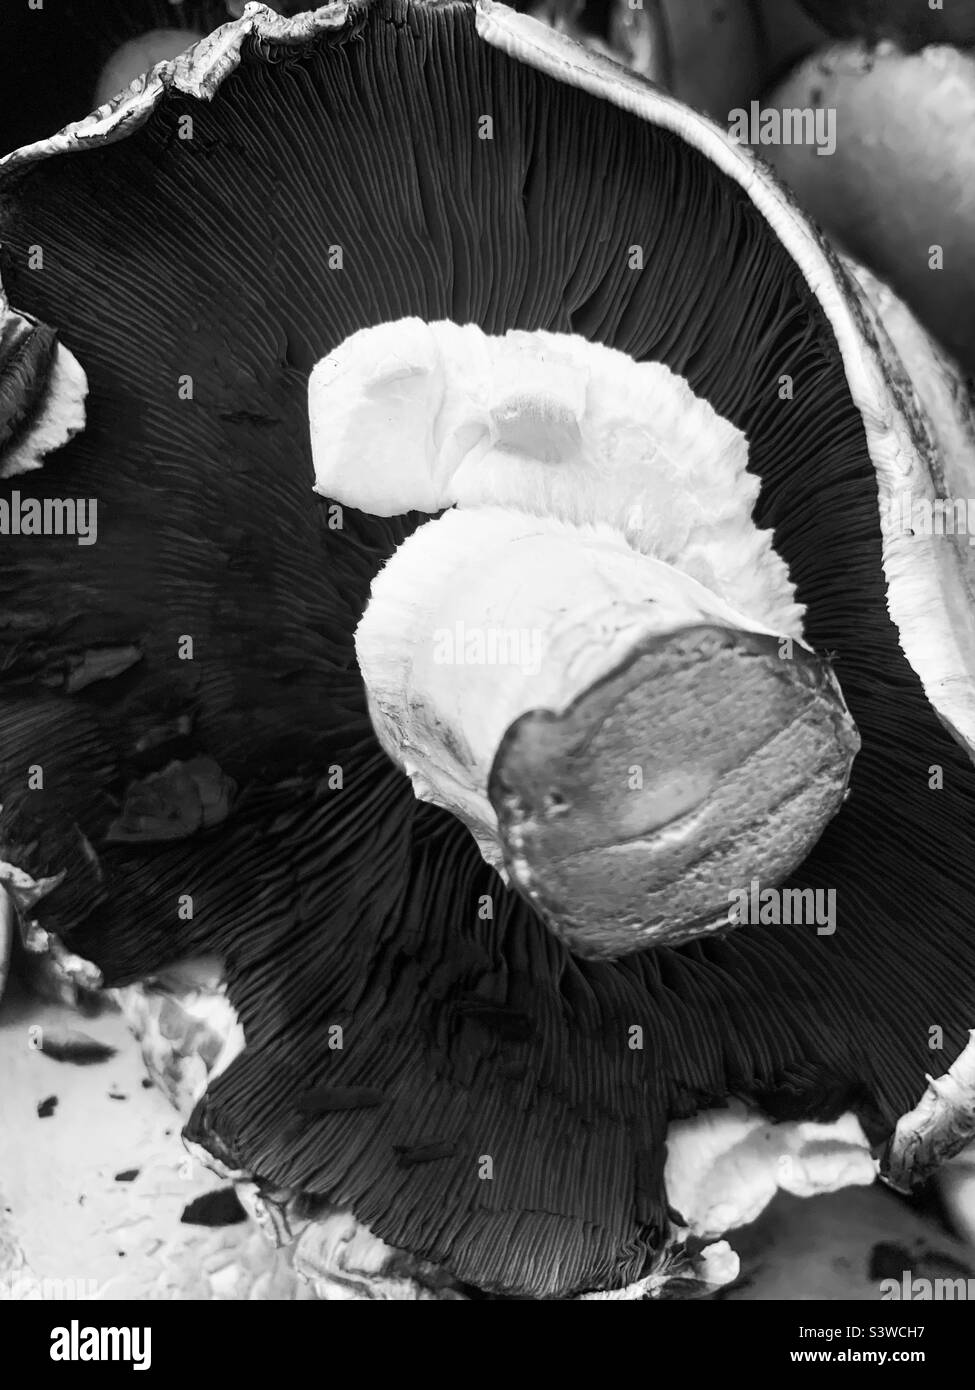 The bottom of a huge portobello mushroom with stem and cap in black and white. Stock Photo